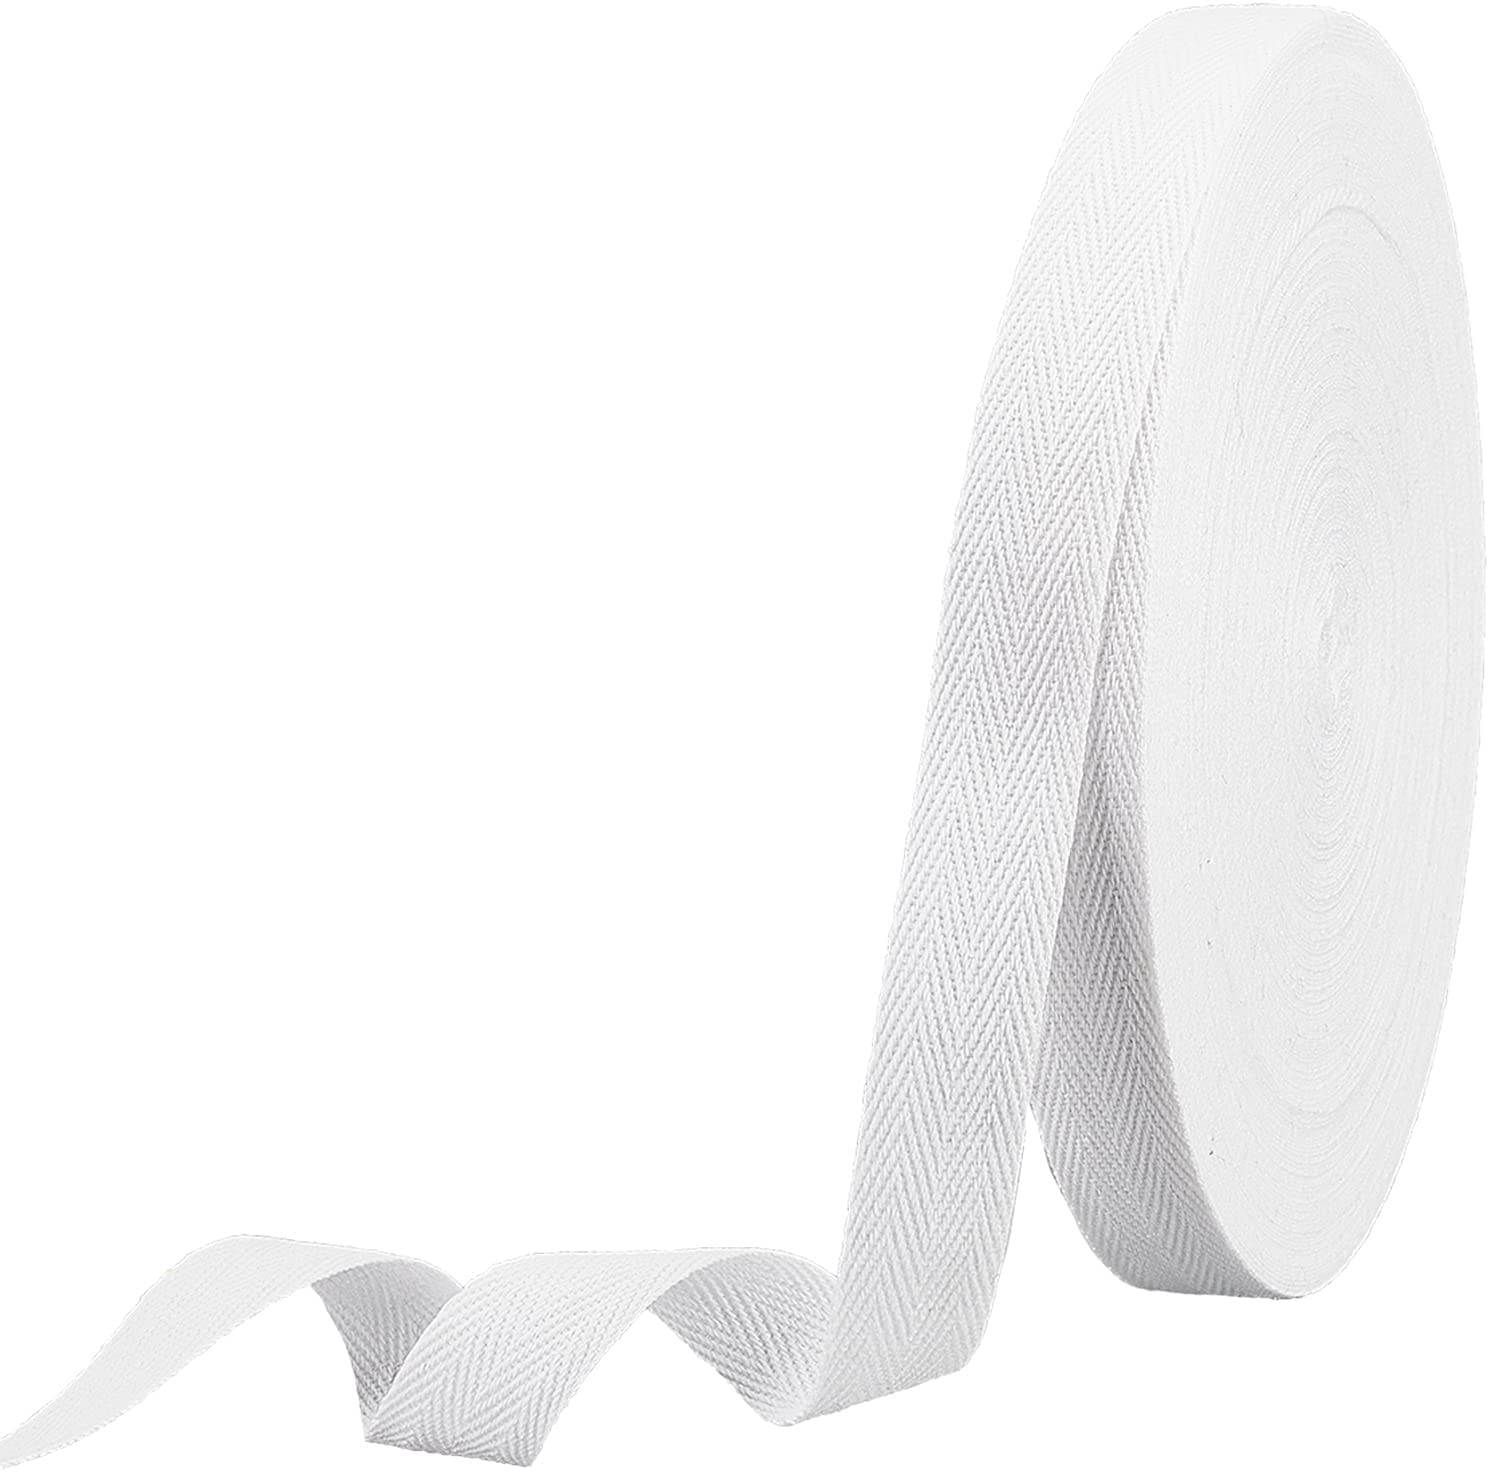 49 Yards(45m)/Roll Herringbone Cotton Webbings, 20mm Wide White Cotton Twill Tape Ribbons Cotton Herringbone Cords for Knit Sewing DIY Crafts